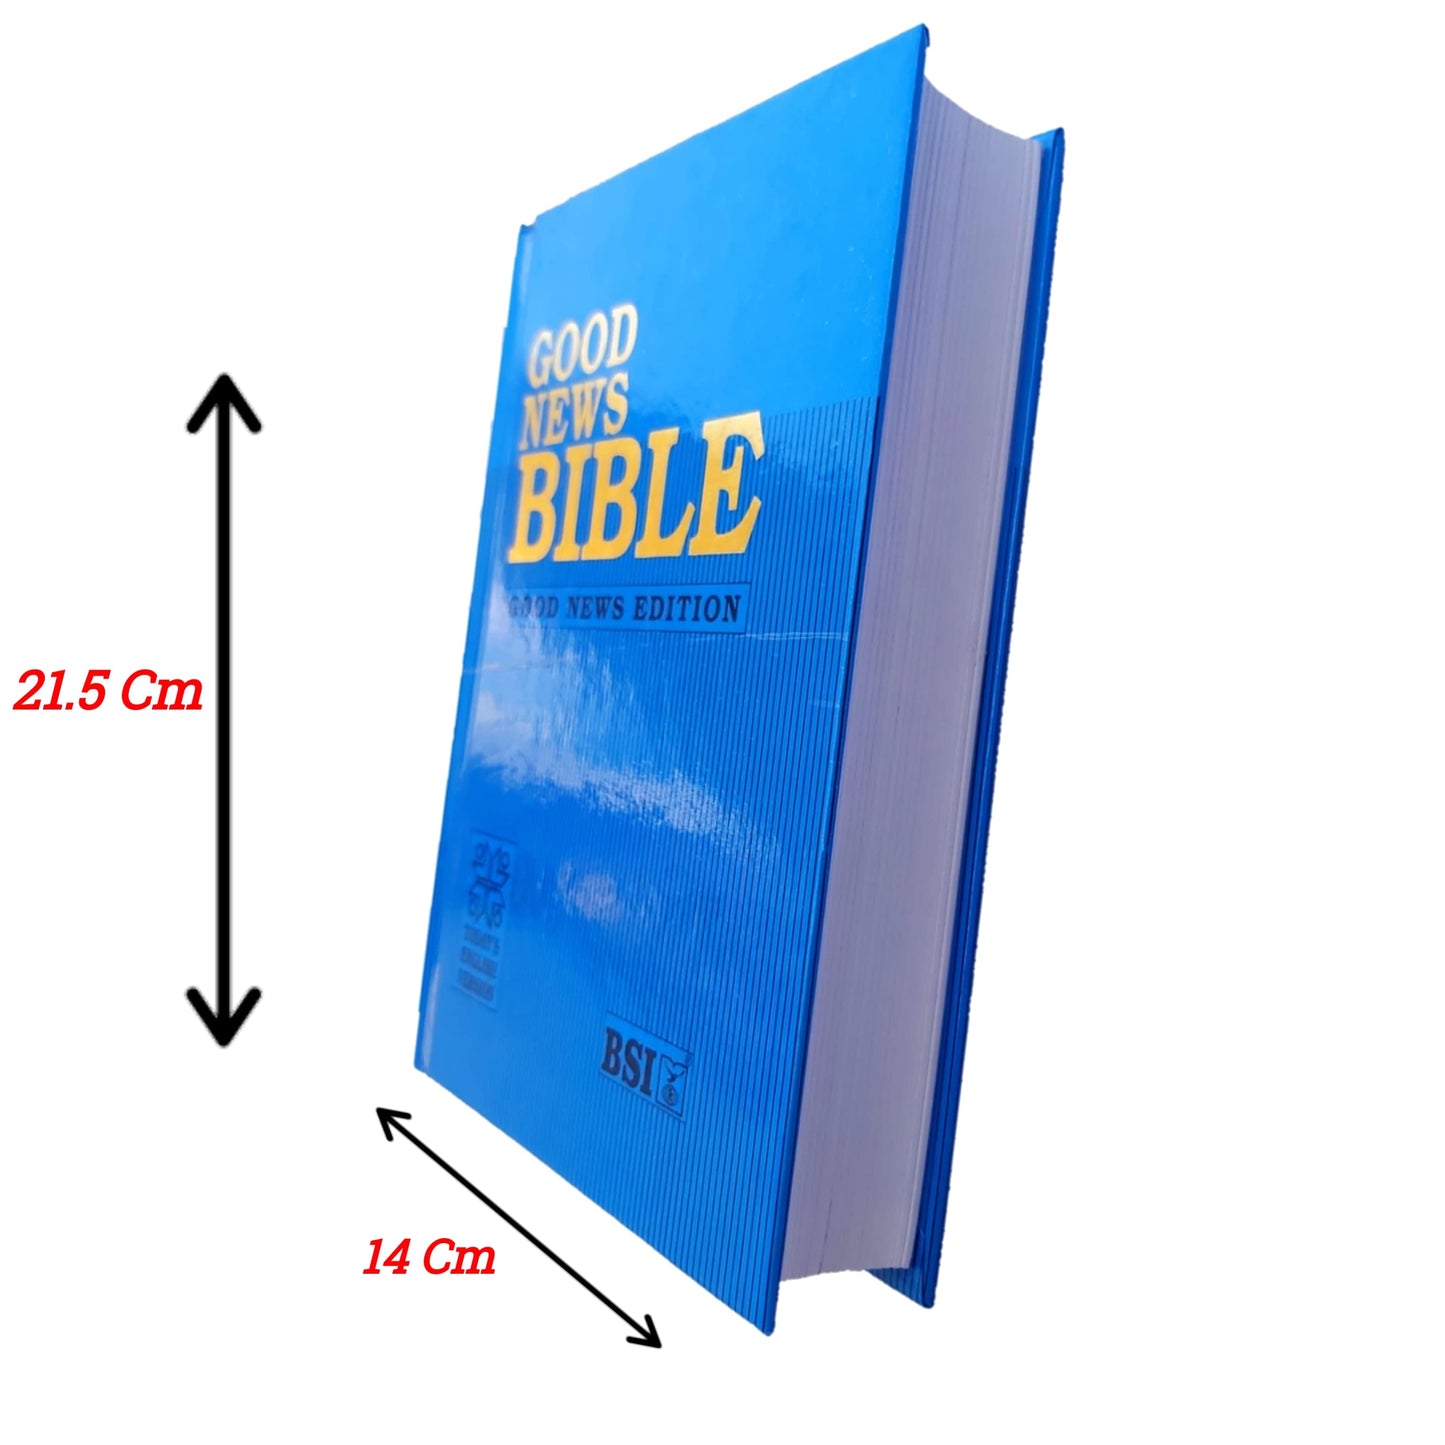 The Holy Bible Good News Compact Edition Blue Color ( Today's English Version )